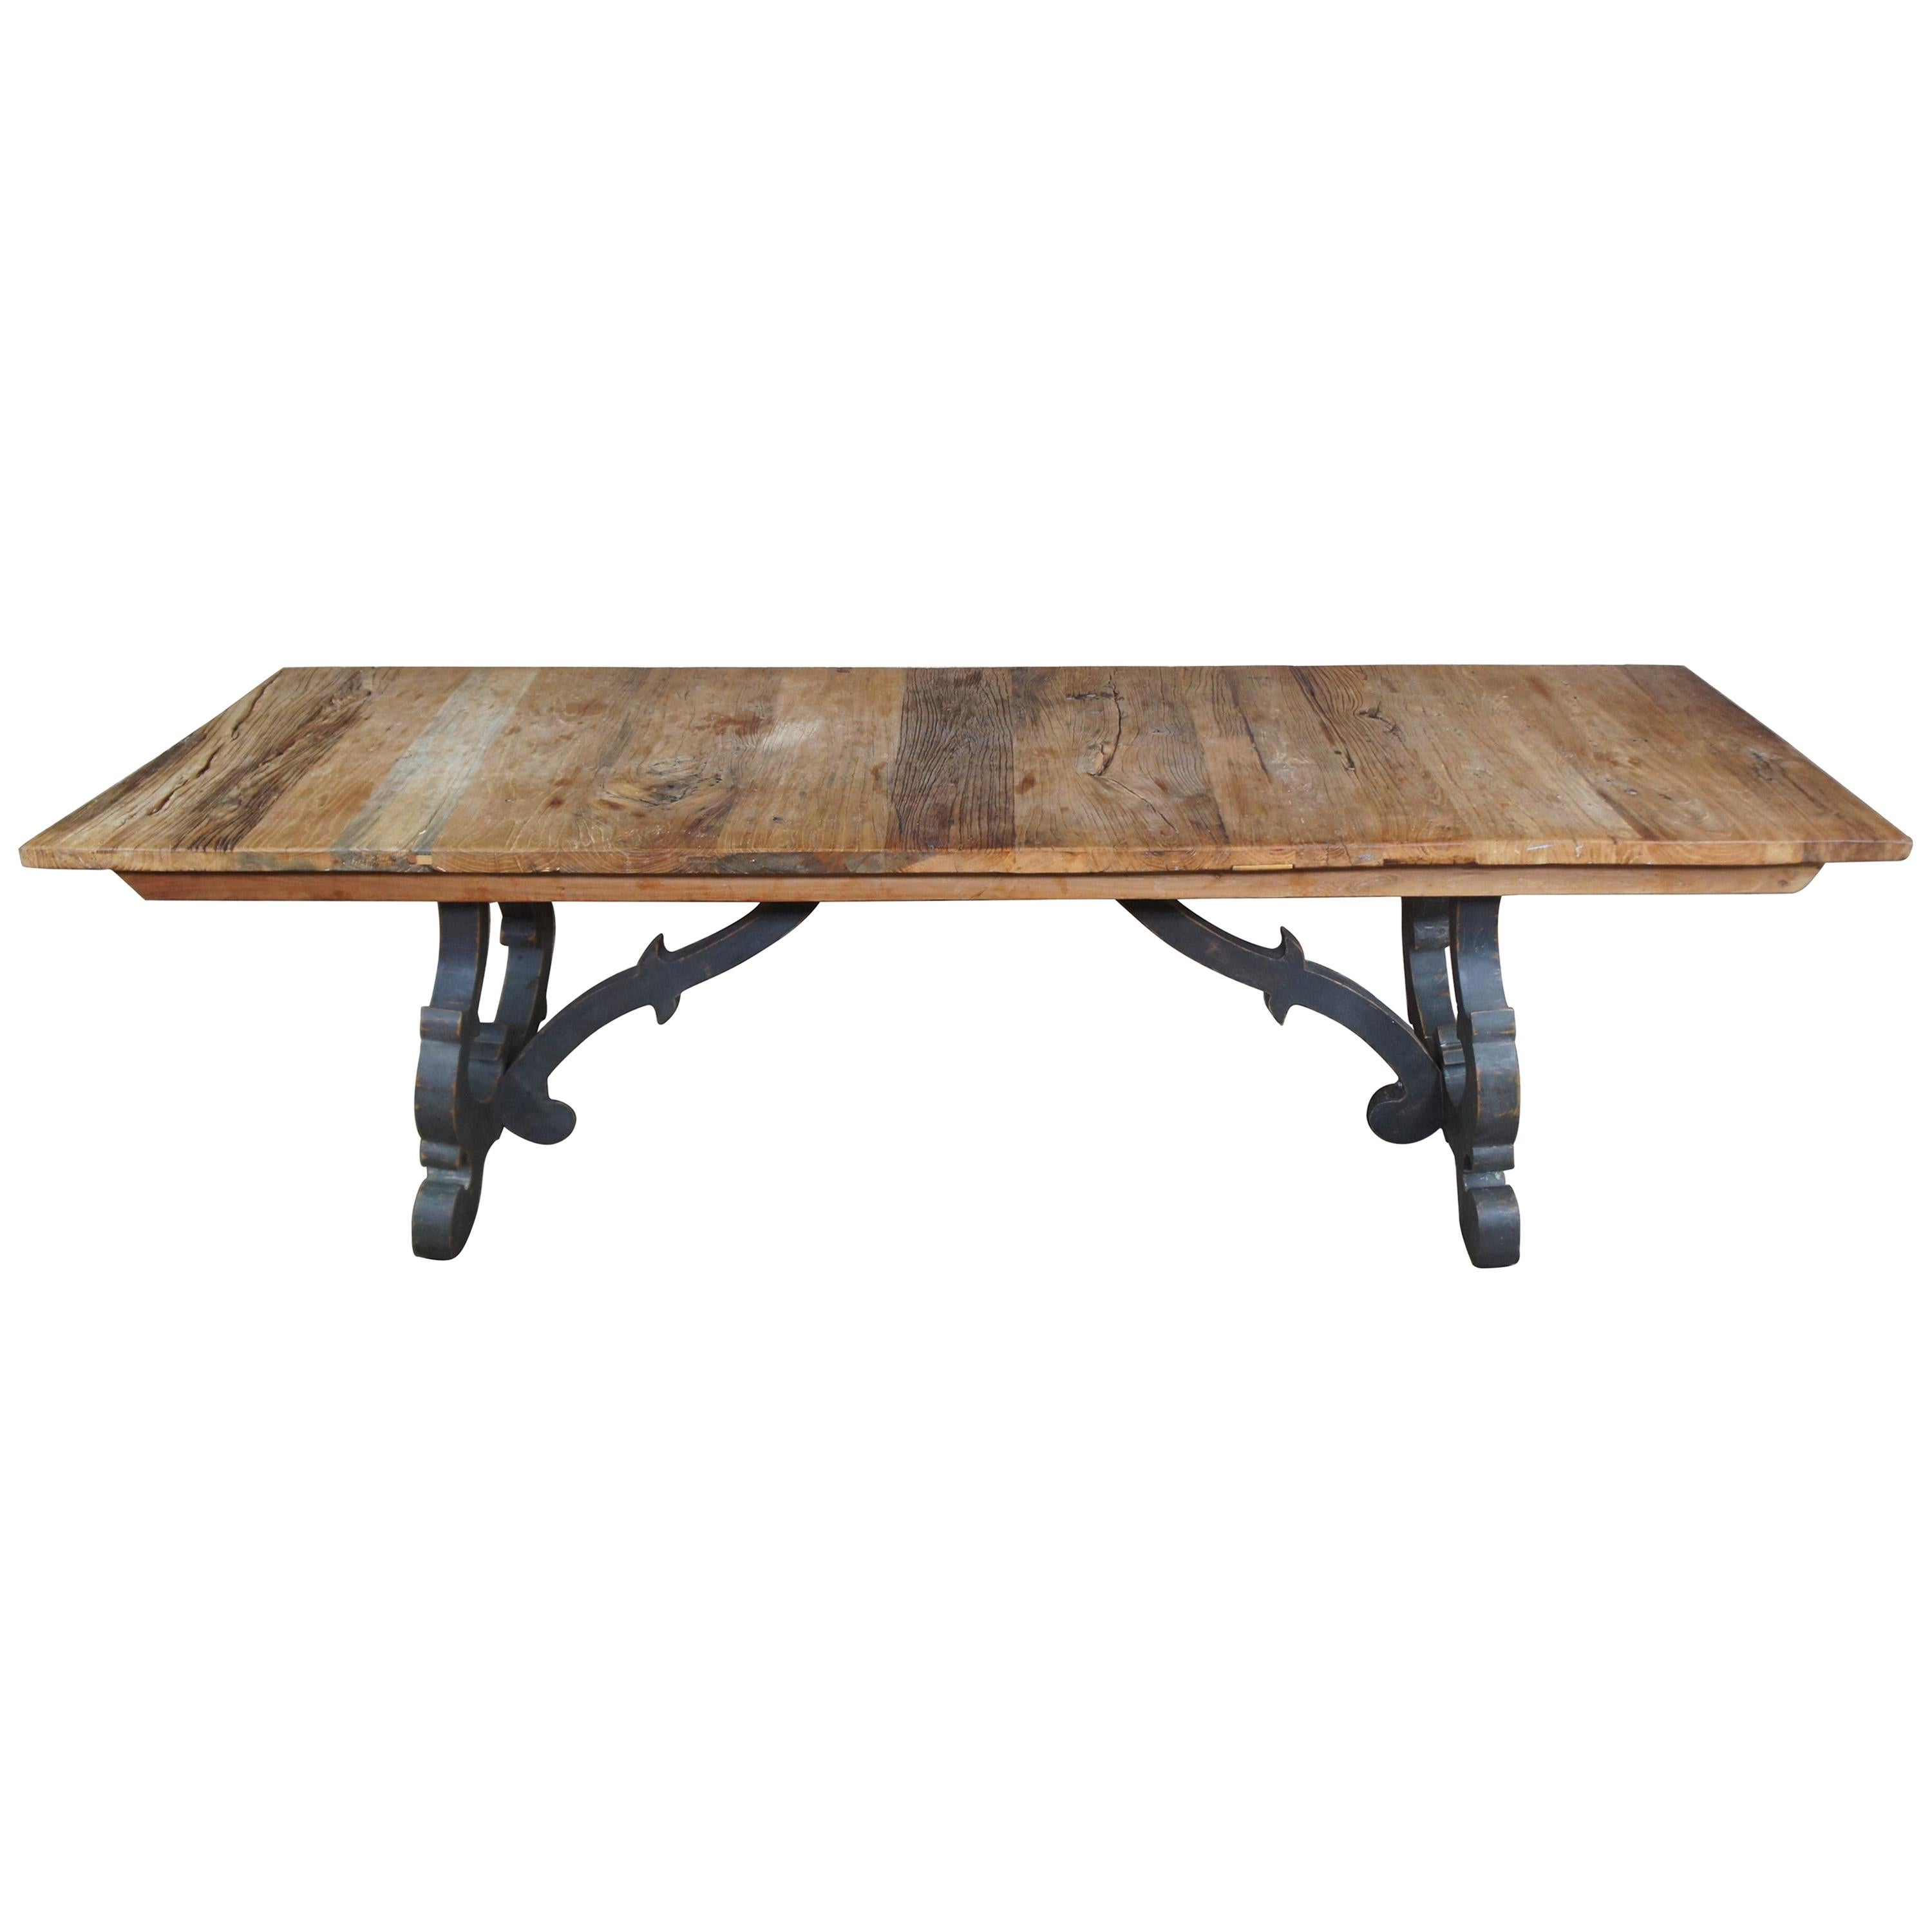 Reclaimed Spanish Revival Old World Rustic Wood Plank Top Dining Table 94"